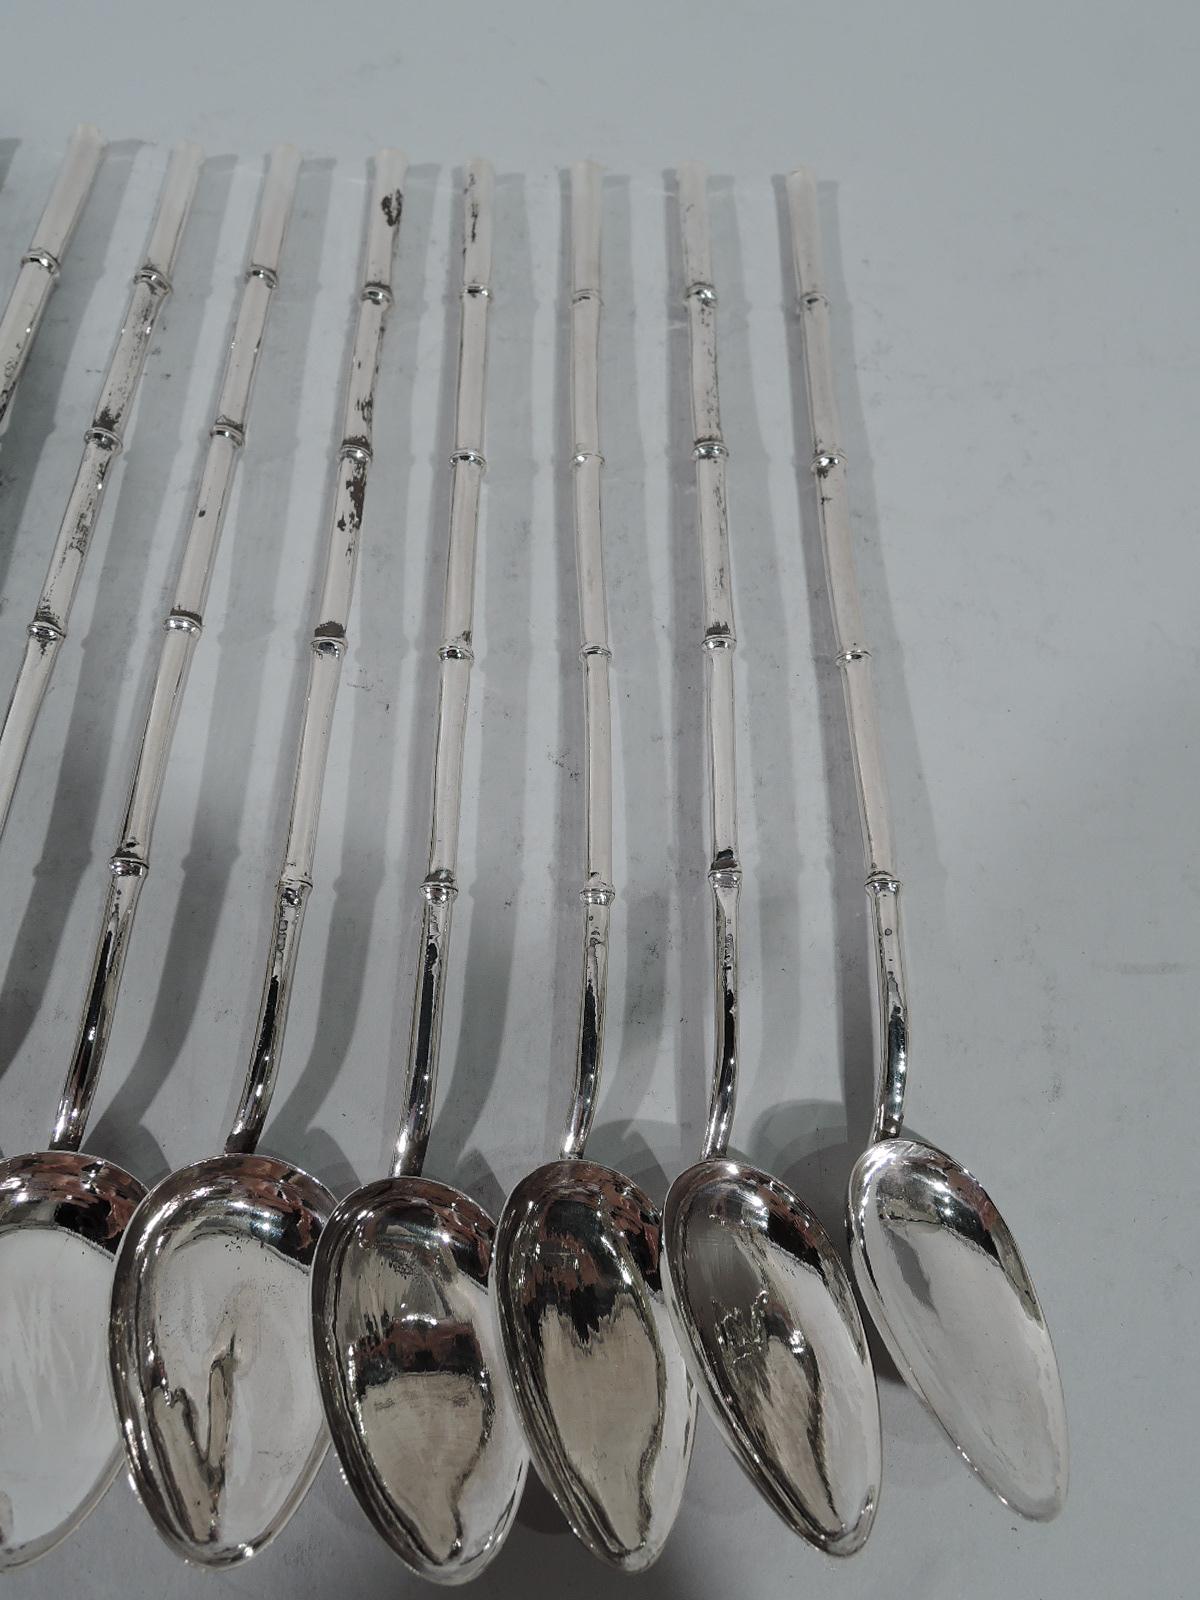 Set of 12 Chinese silver iced tea spoons. Each bamboo-form shaft and ovoid bowl. Exotic stirrers for the next drinks party. Hallmarked. Total weight: 4.5 troy ounces.